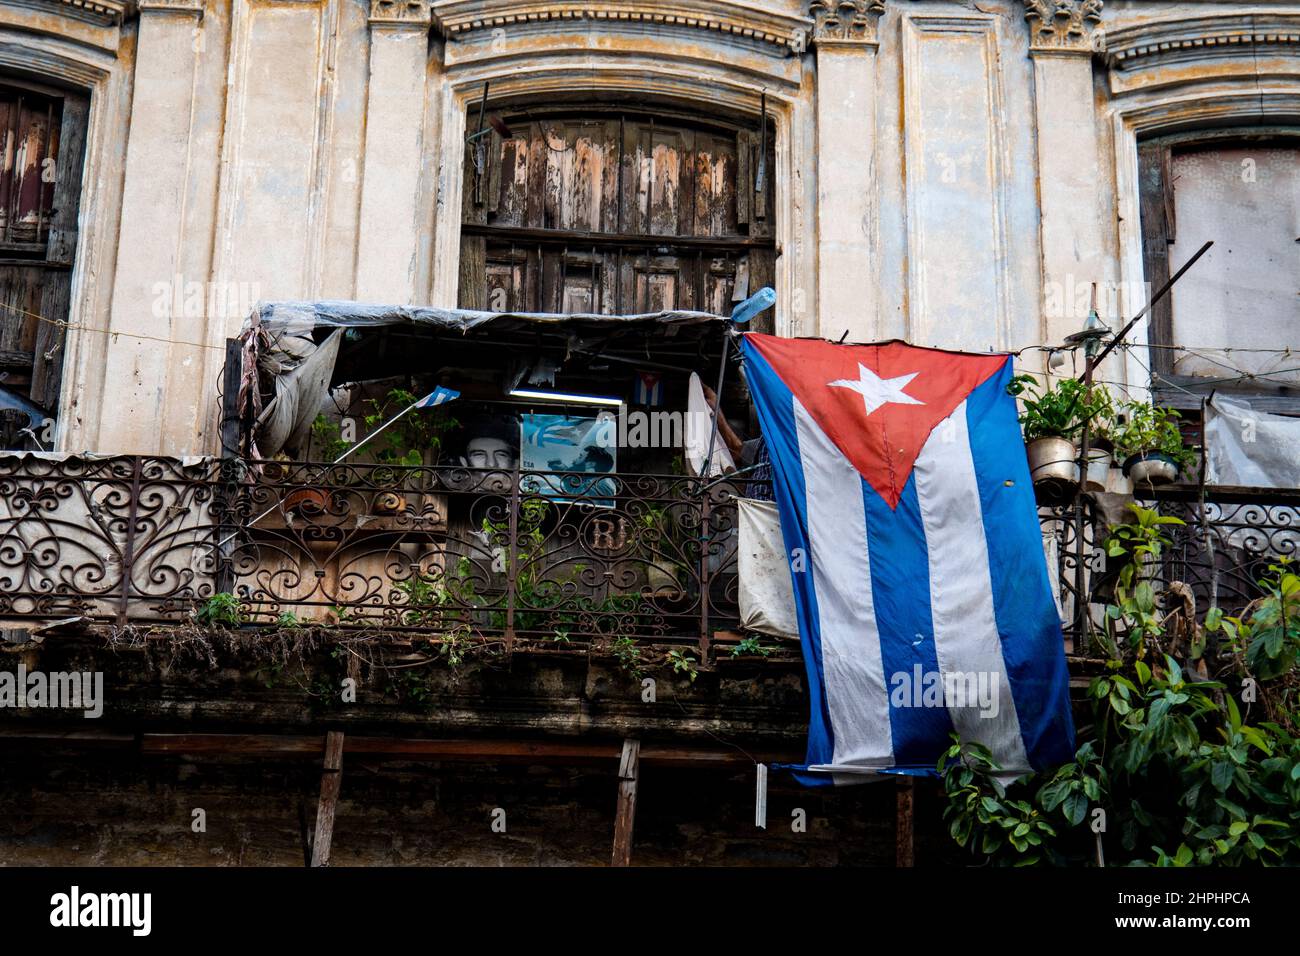 Balcony in Havana, Cuba with pictures of Fidel Castro and a large Cuban flag. Stock Photo